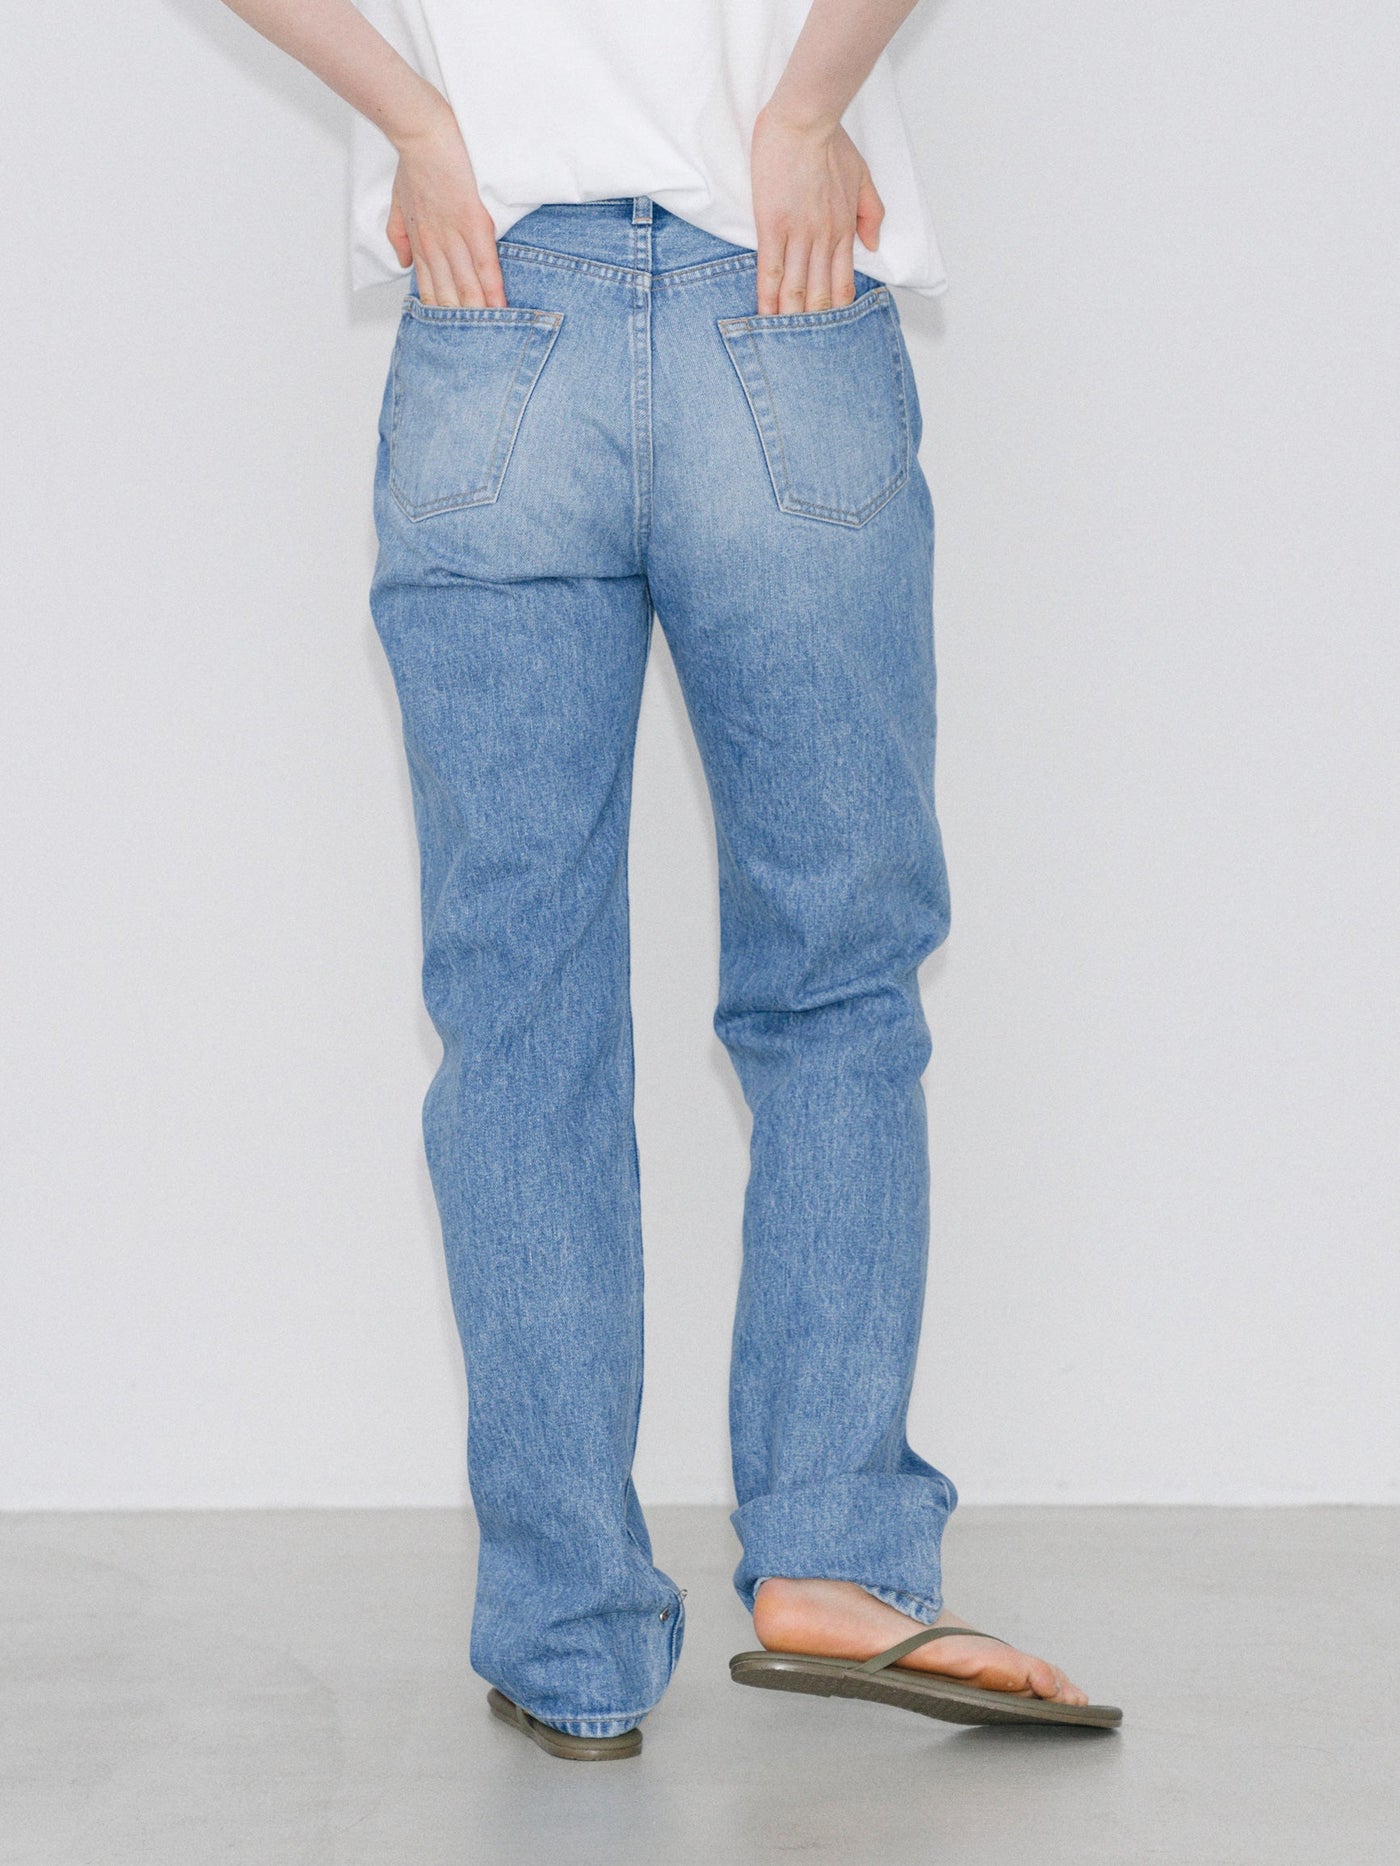 Go to jeans (size 1)